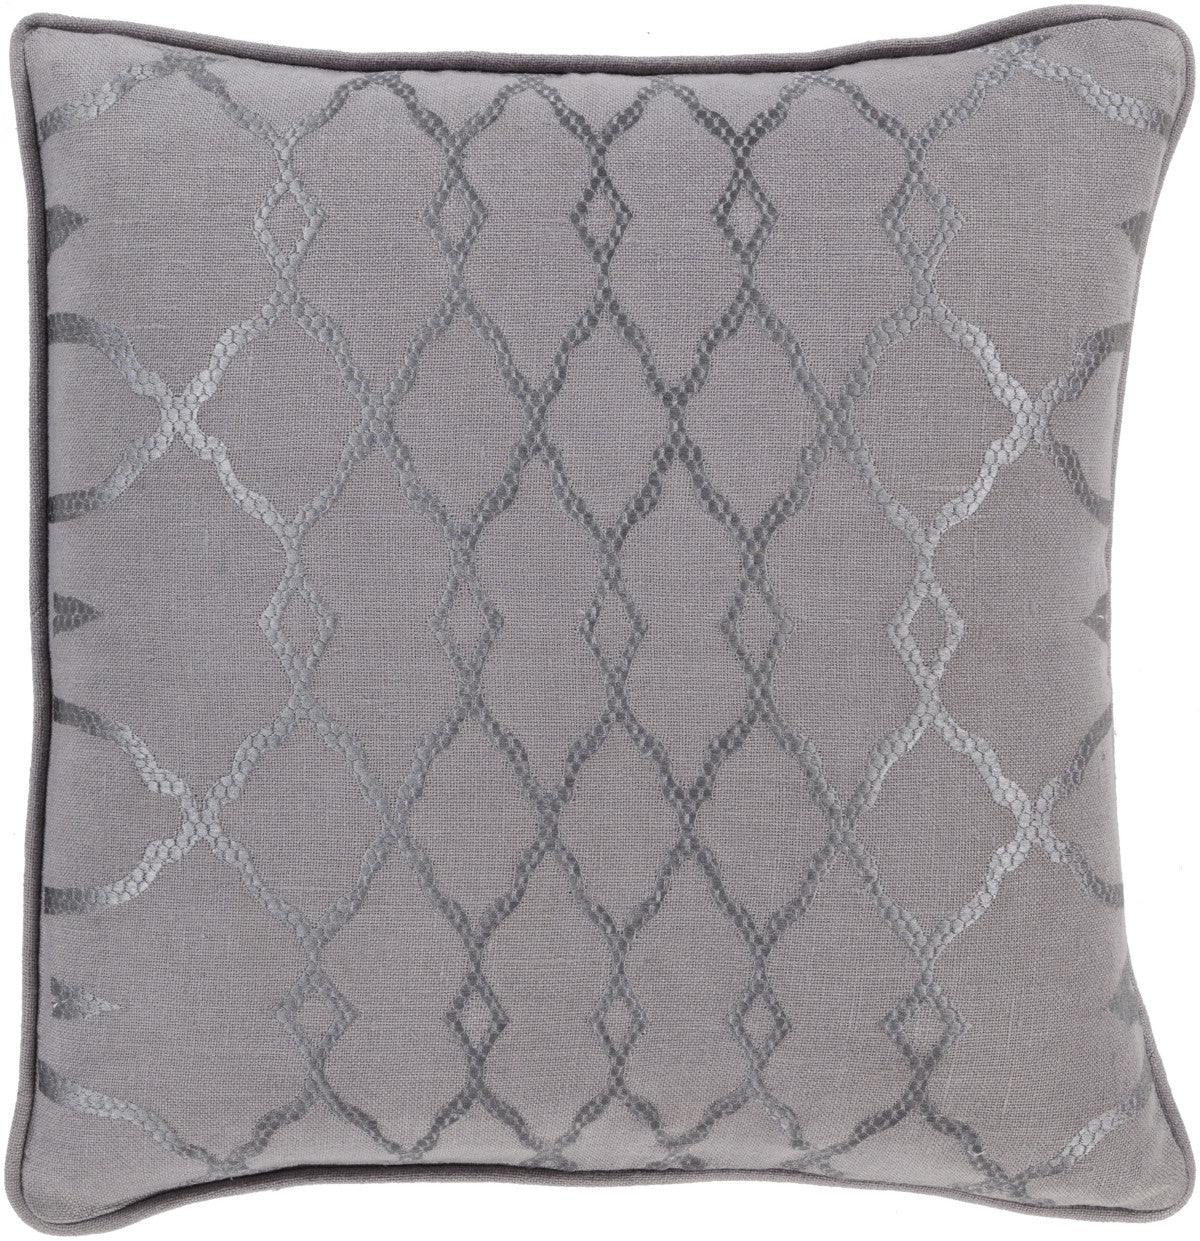 Surya Lydia Luxury in Linen LY-004 Pillow